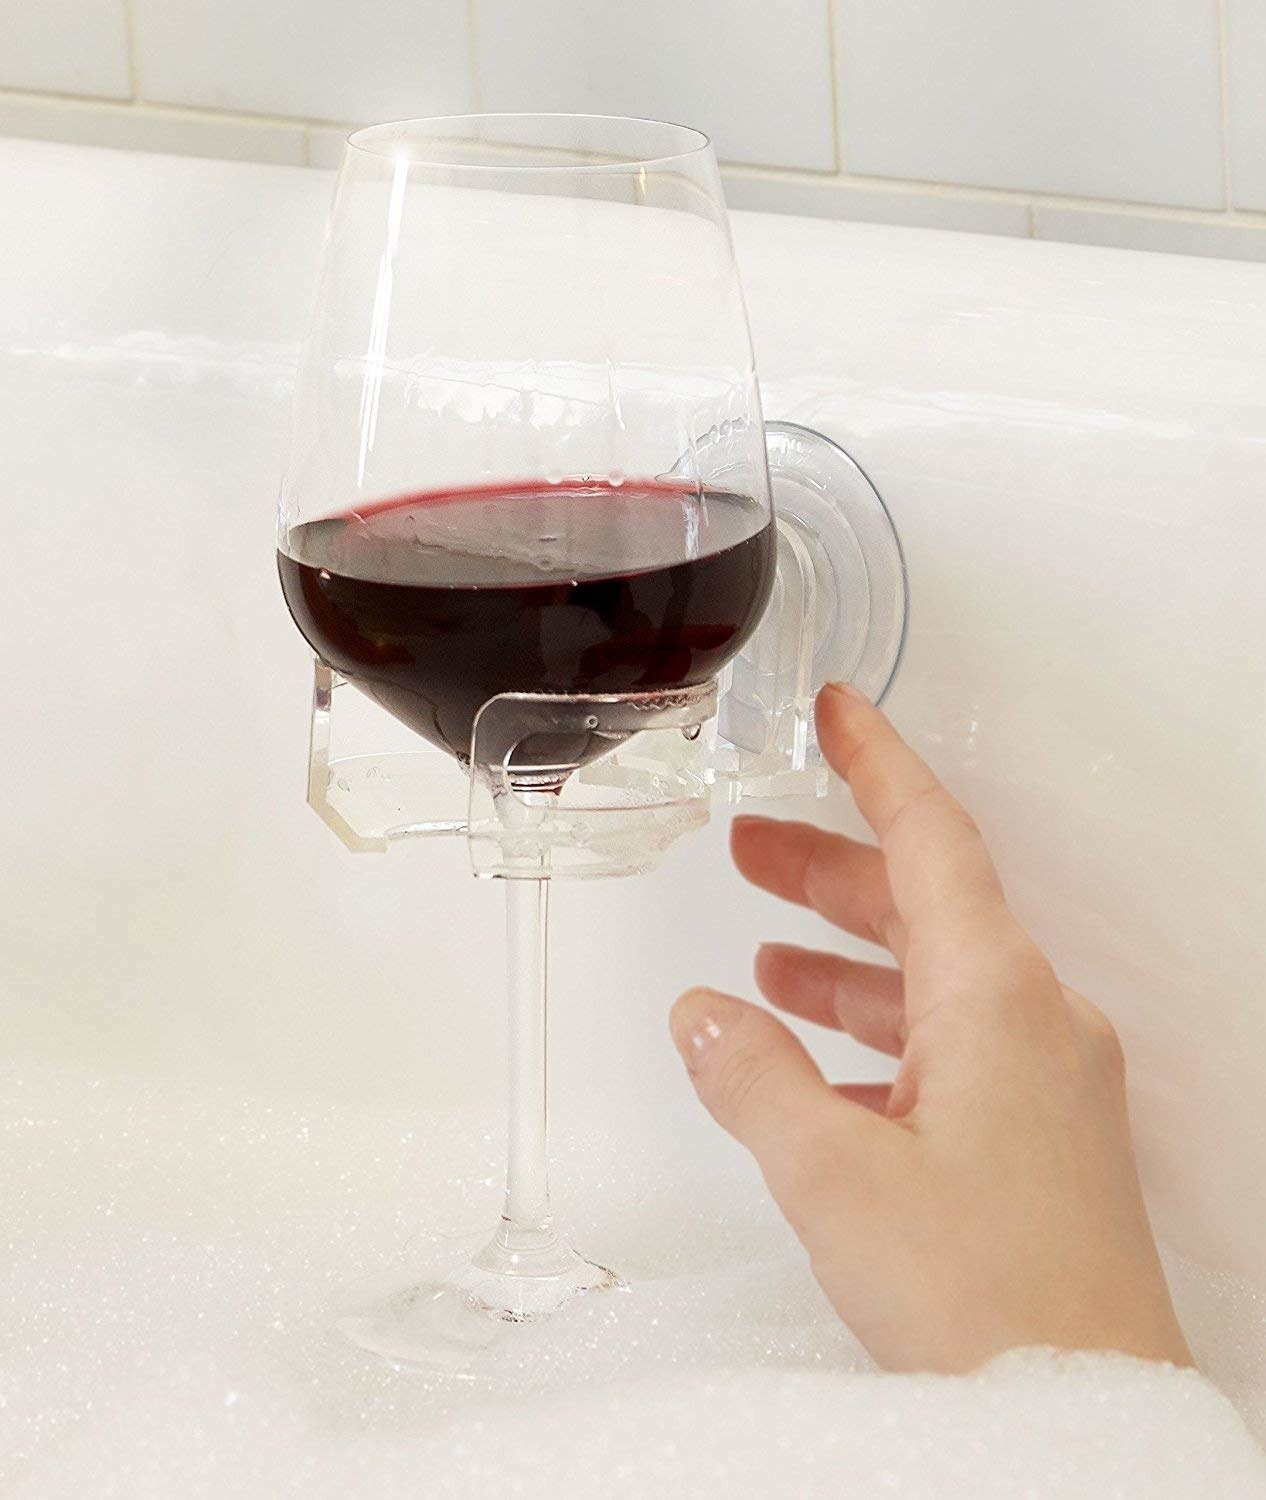 A glass of wine in the holder, which is held in place by a suction cup